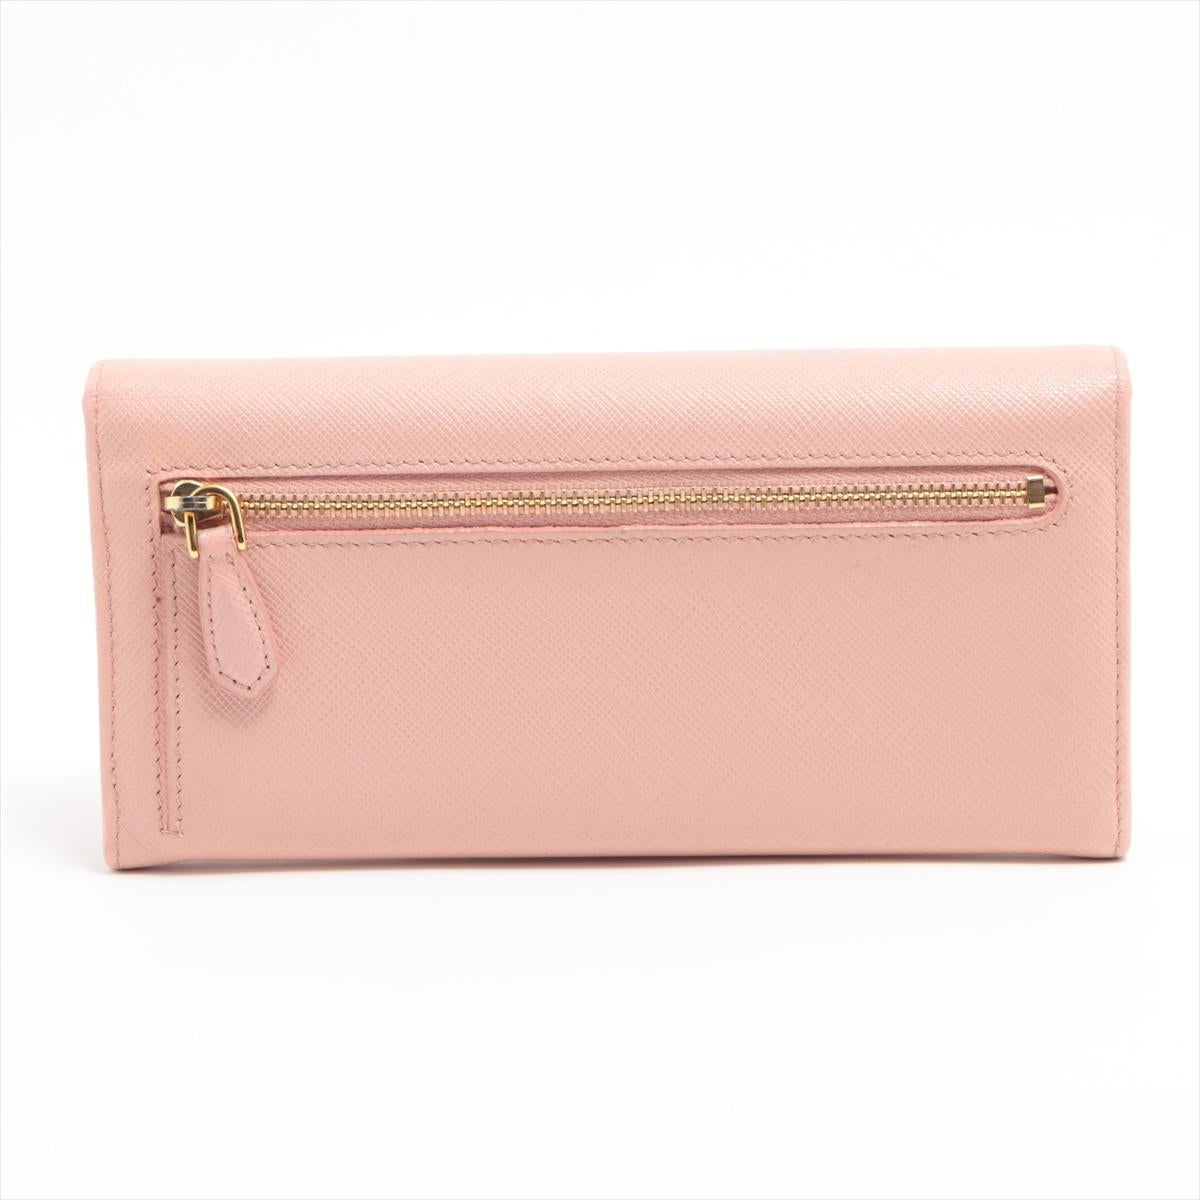 Prada Ribbon Saffiano Leather Wallet Pink In Good Condition For Sale In Indianapolis, IN